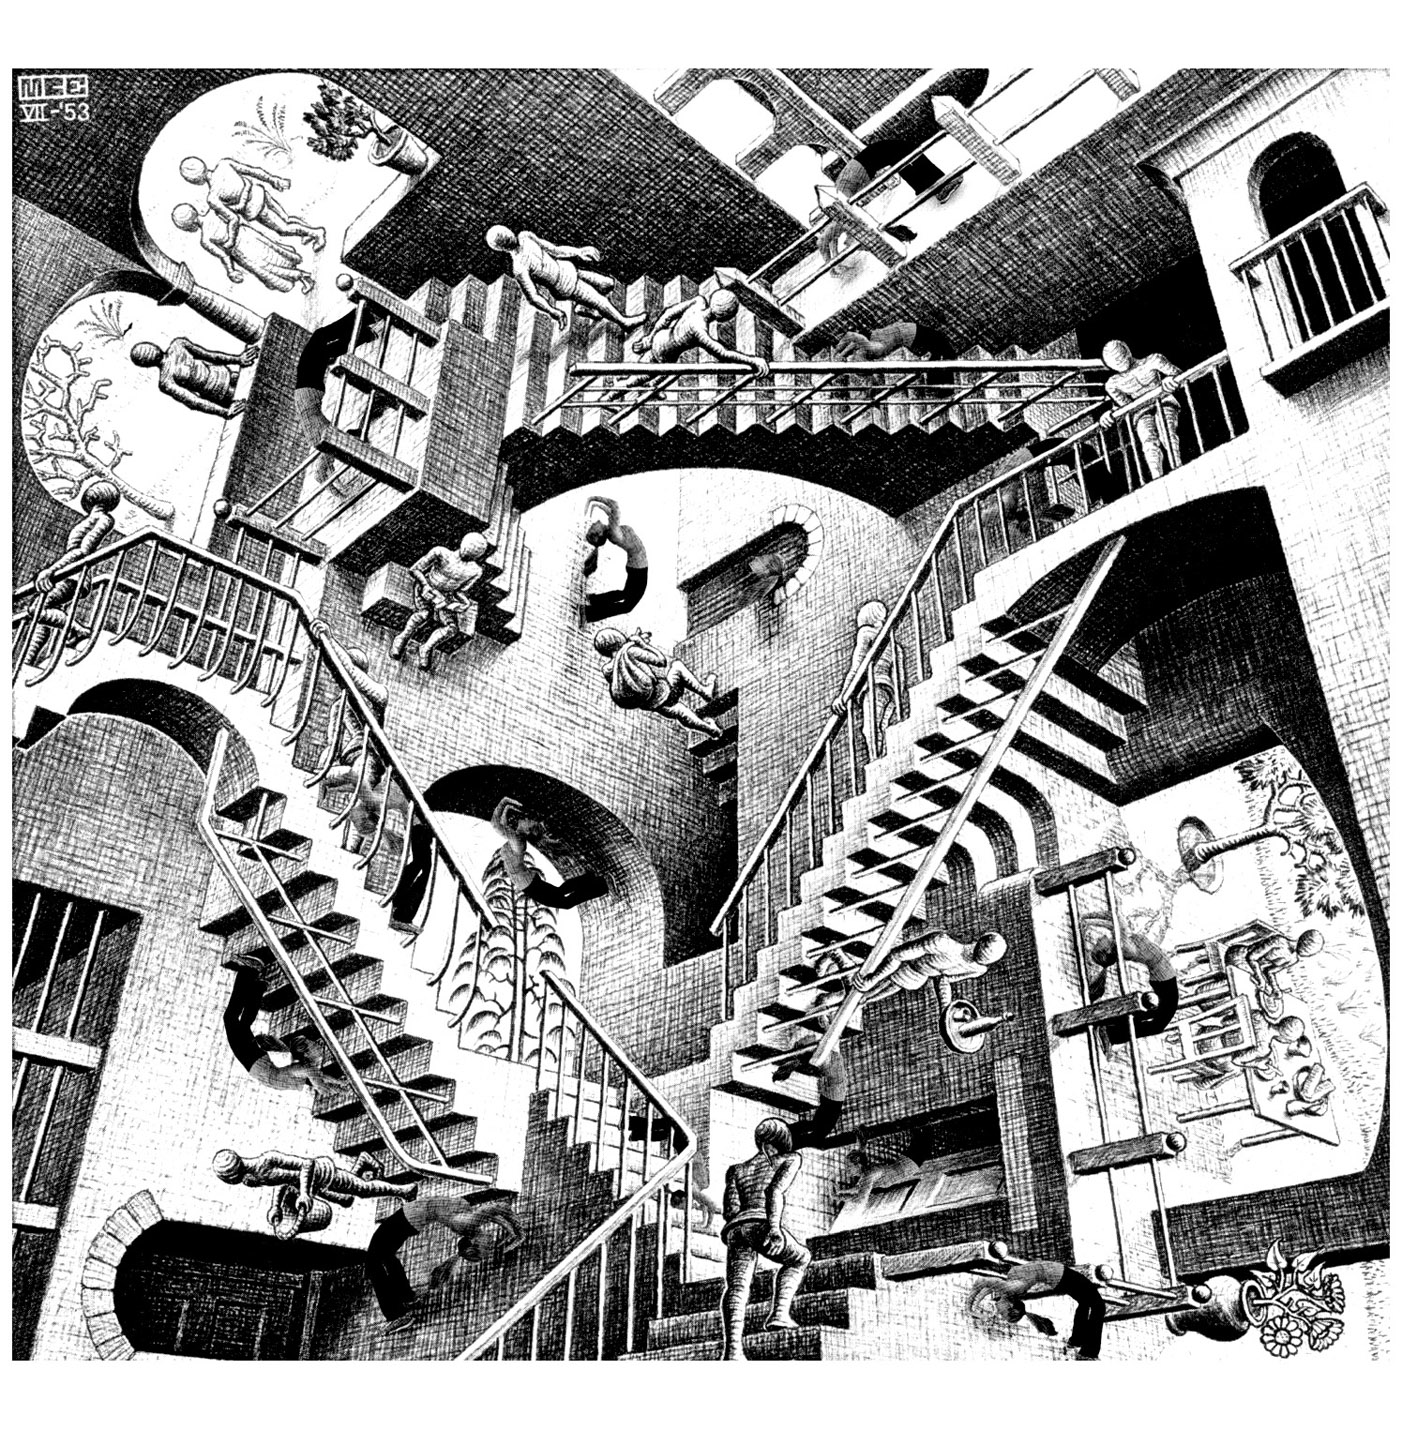 The famous drawing 'Relativity' by Mc Escher ... Where is the beginning? The end ?